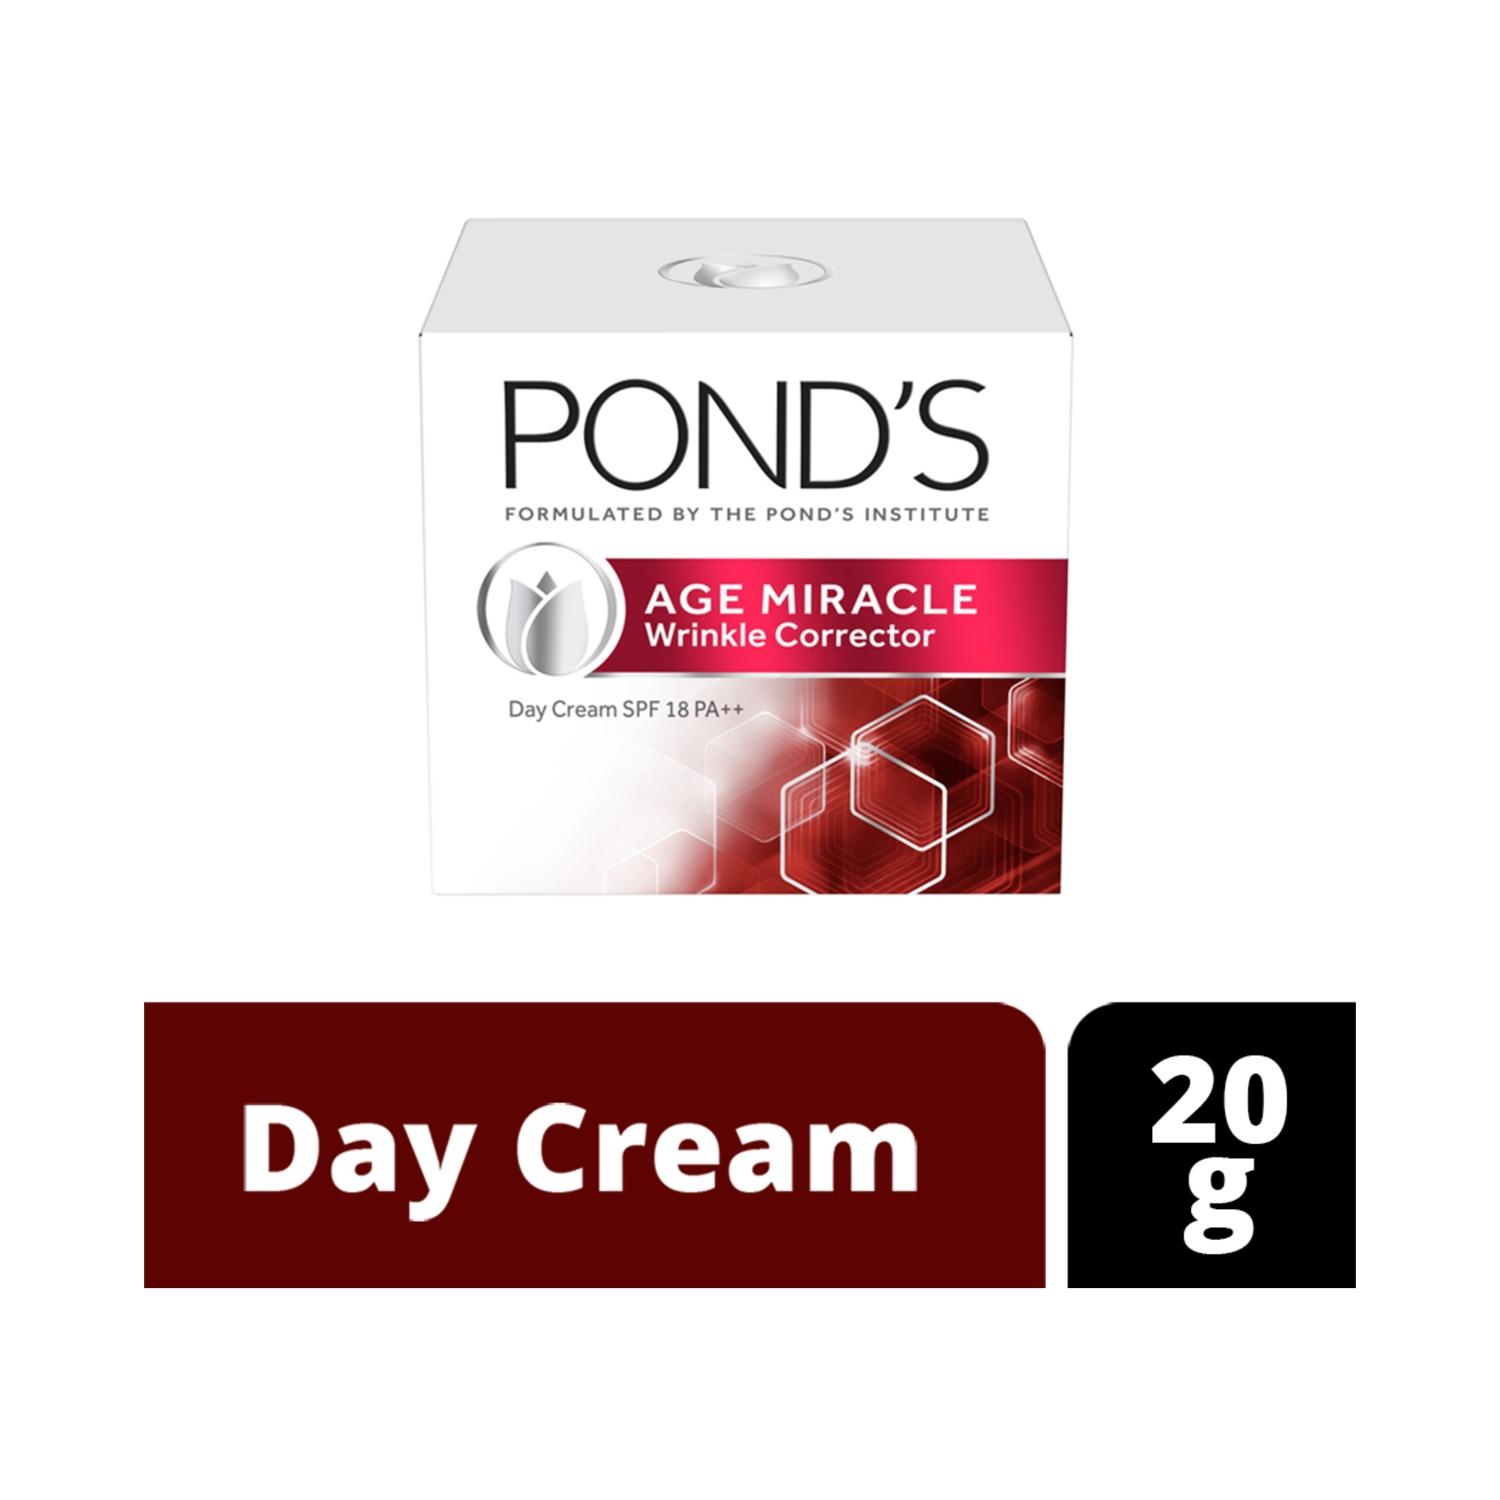 pond's-age-miracle-youthful-glow-day-cream-spf-15-pa++-(20g)